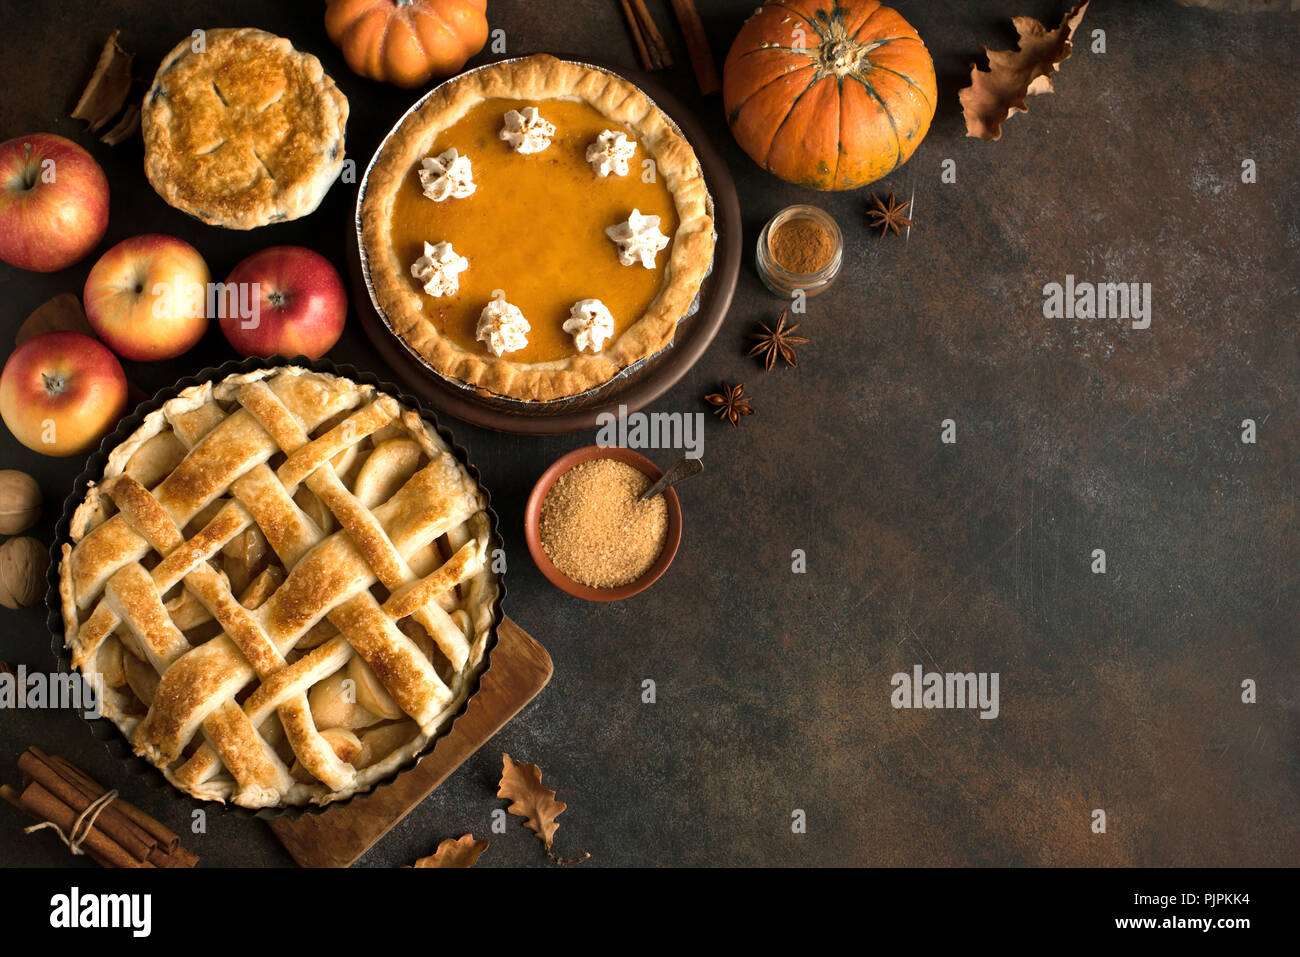 Thanksgiving pumpkin and apple various pies, top view, copy space. Fall traditional homemade apple and pumpkin pie for autumn holiday. Stock Photo